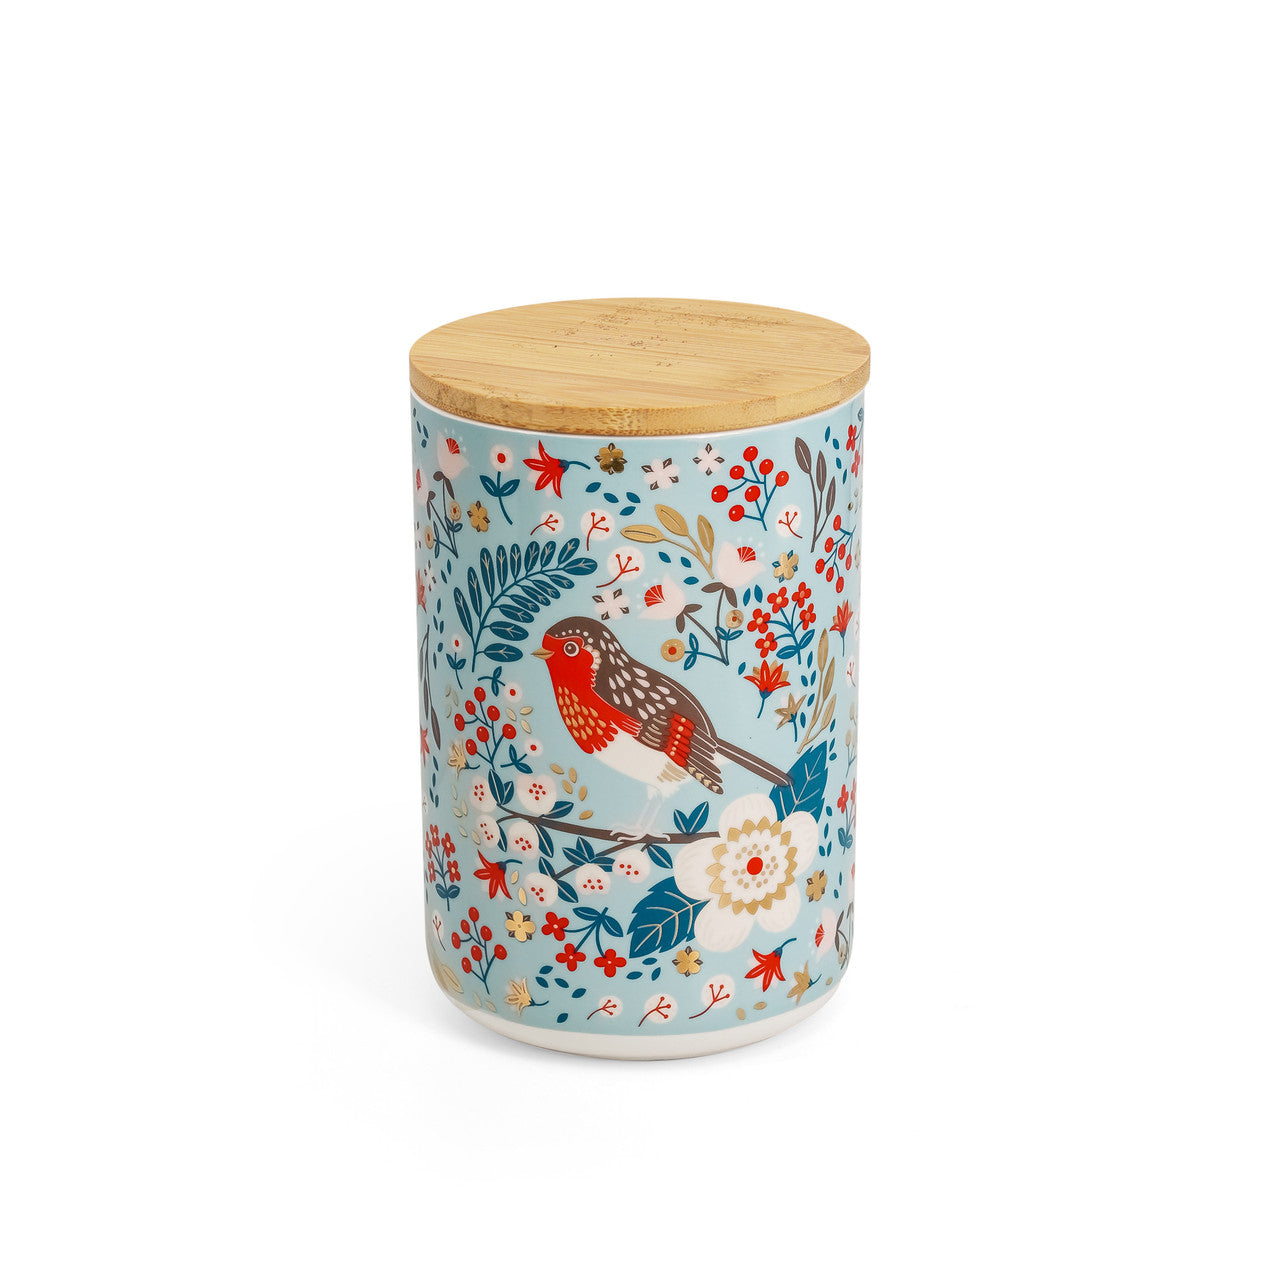 Tipperary Crystal Birdy Storage Jar - Robin - New 2022  New to our collection, this birdy storage jar come beautifully illustrated and presented in a rigid Tipperary Crystal gift box. Makes a wonderful gift to be enjoyed.  The Birdy Collection is a series of 6 exclusively commissioned illustrations inspired by native Irish birds; Bullfinch, Goldfinch, Blue tit, Greenfinch, Kingfisher and Robin.